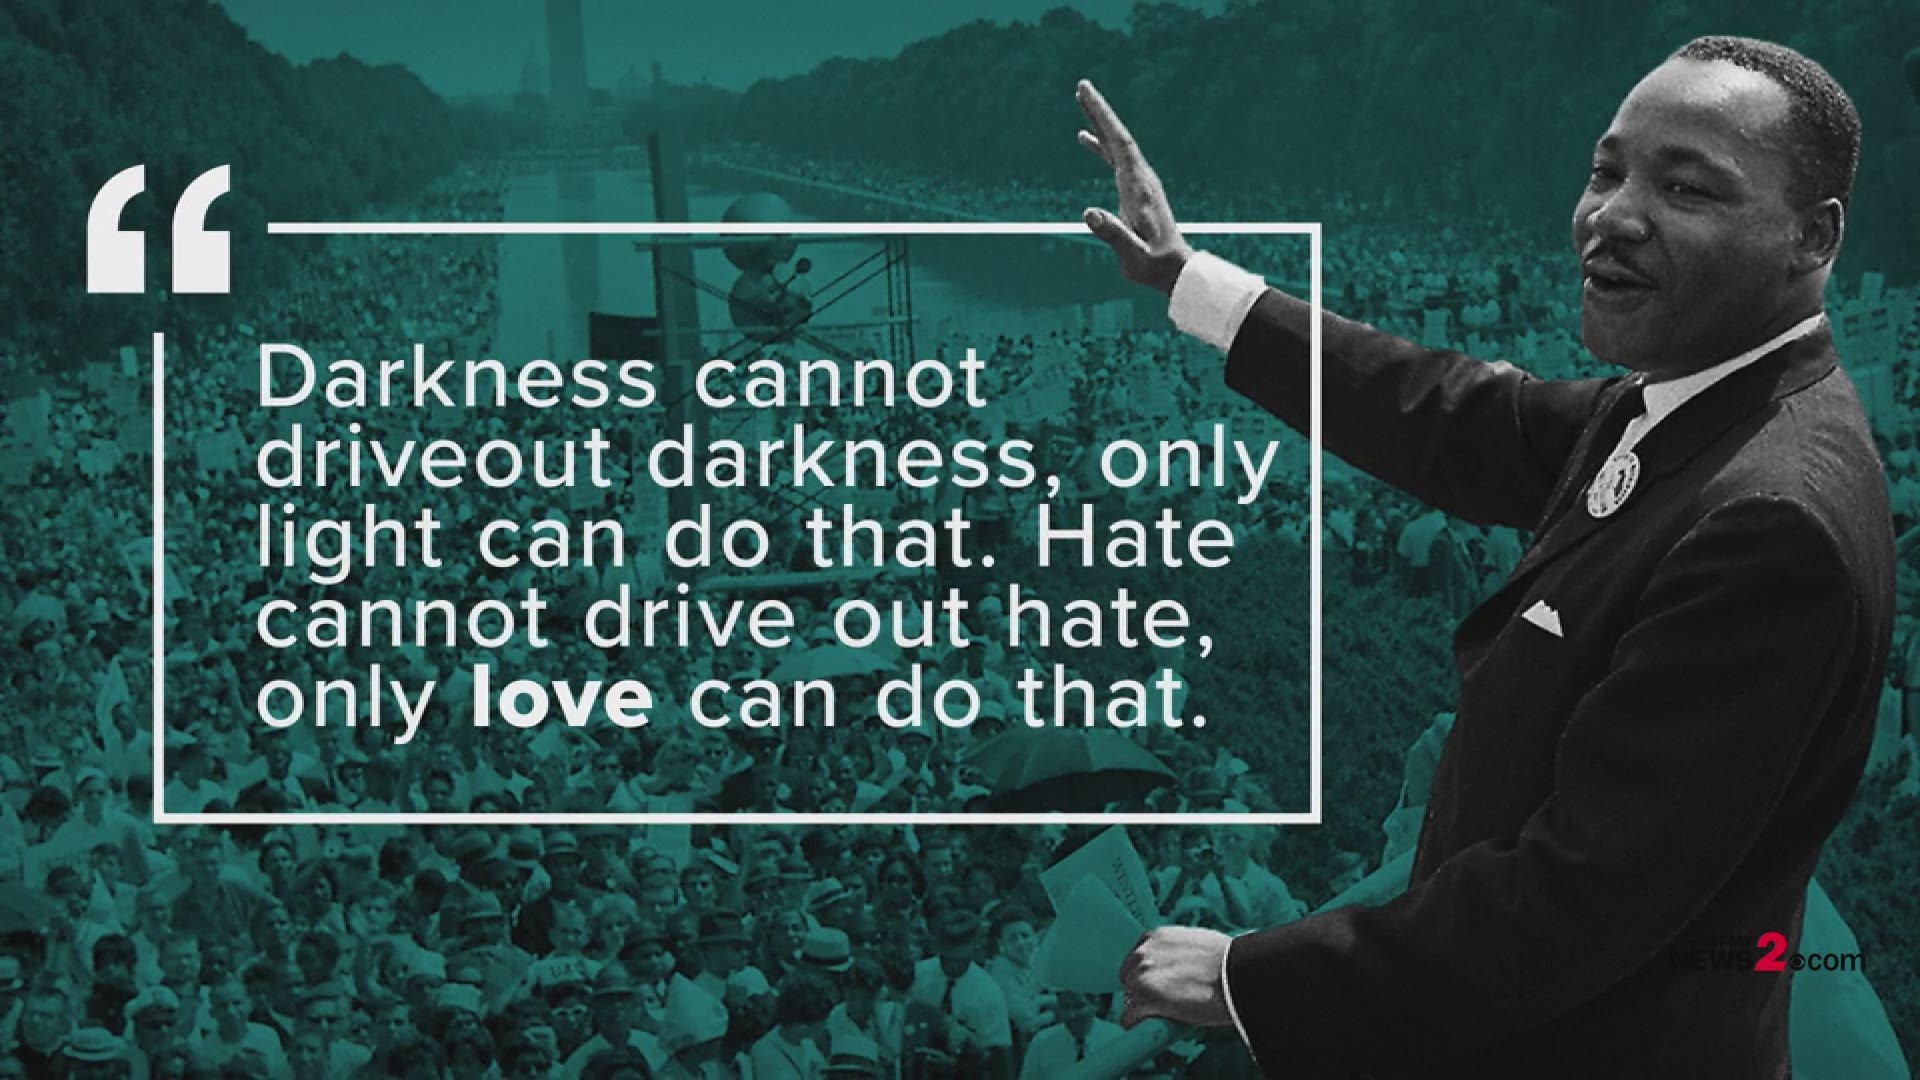 Remembering Dr. Martin Luther King, Jr. and his words that inspired the World